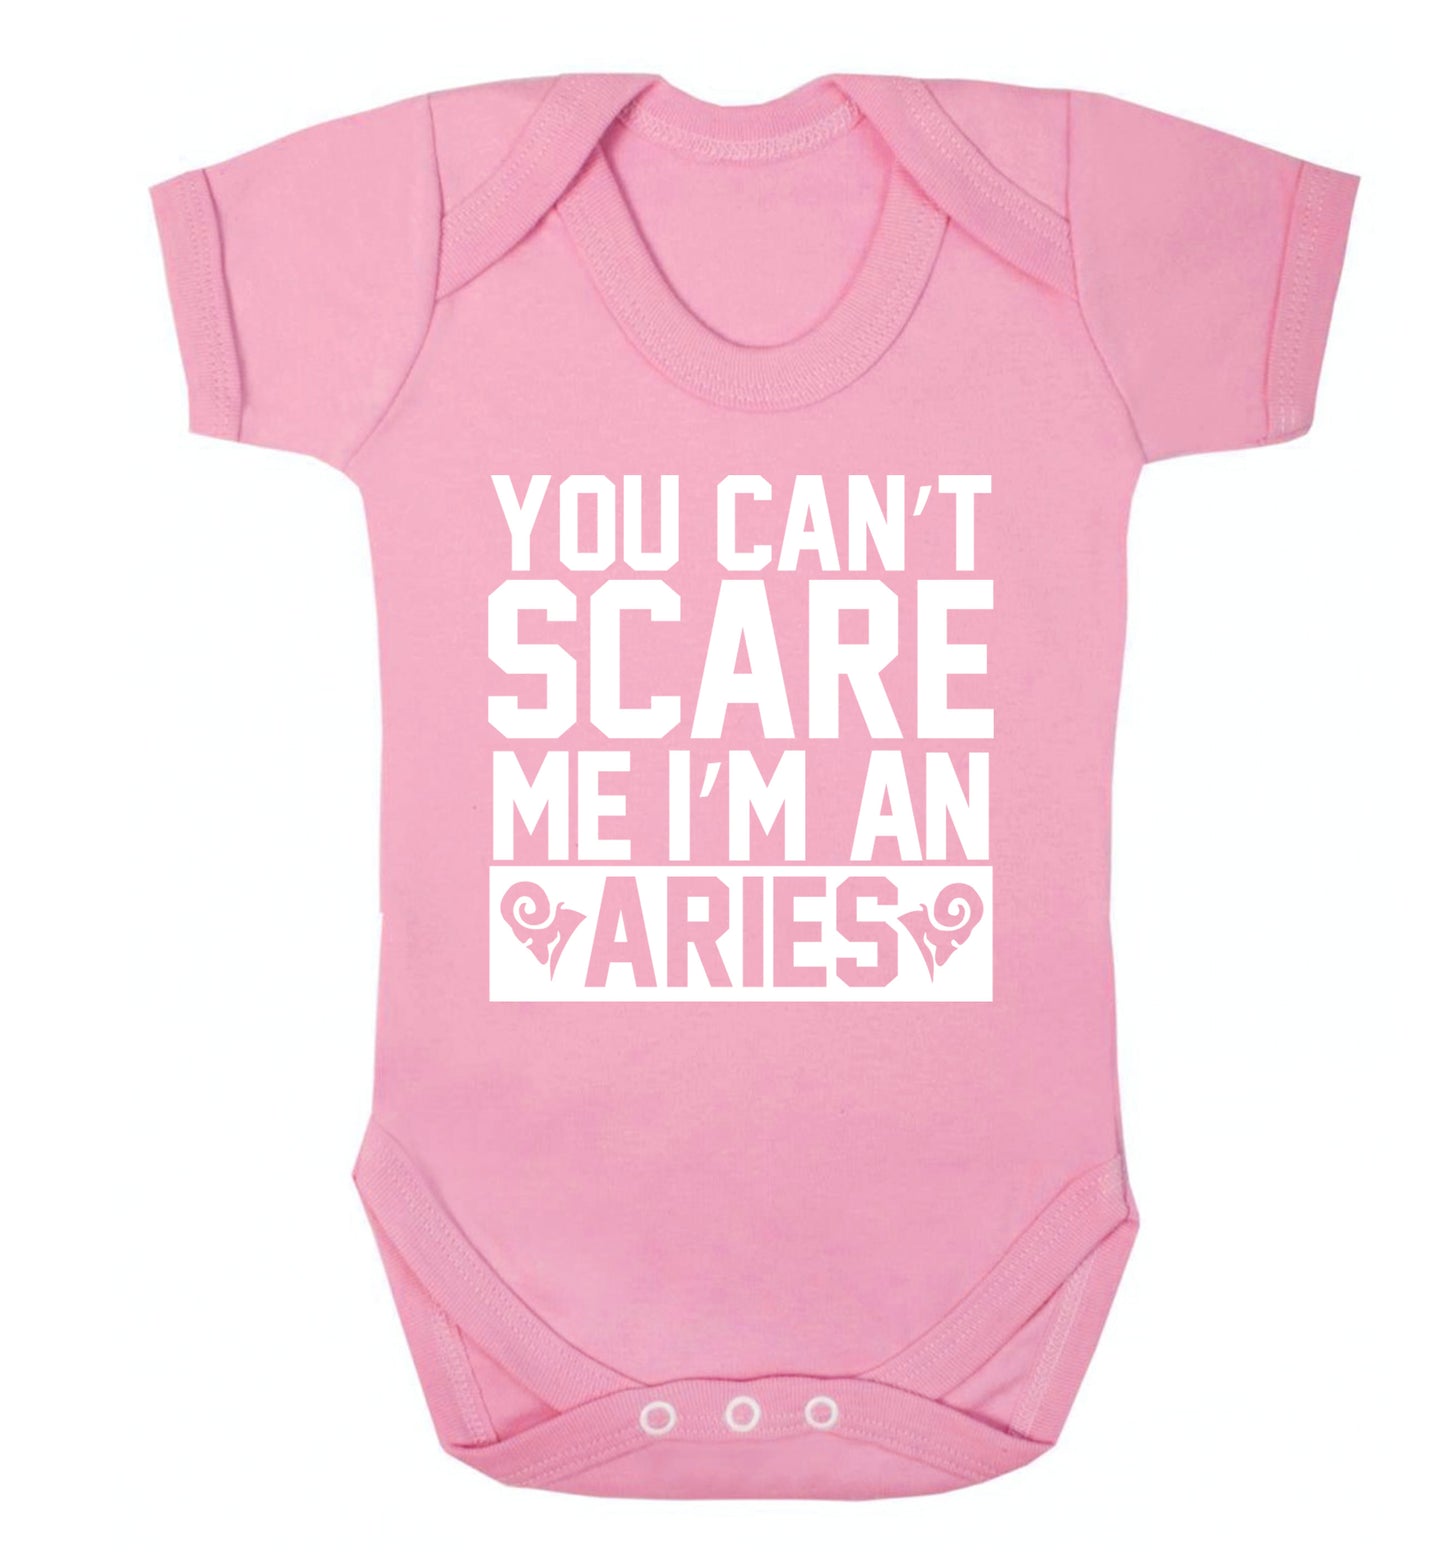 You can't scare me I'm an aries Baby Vest pale pink 18-24 months